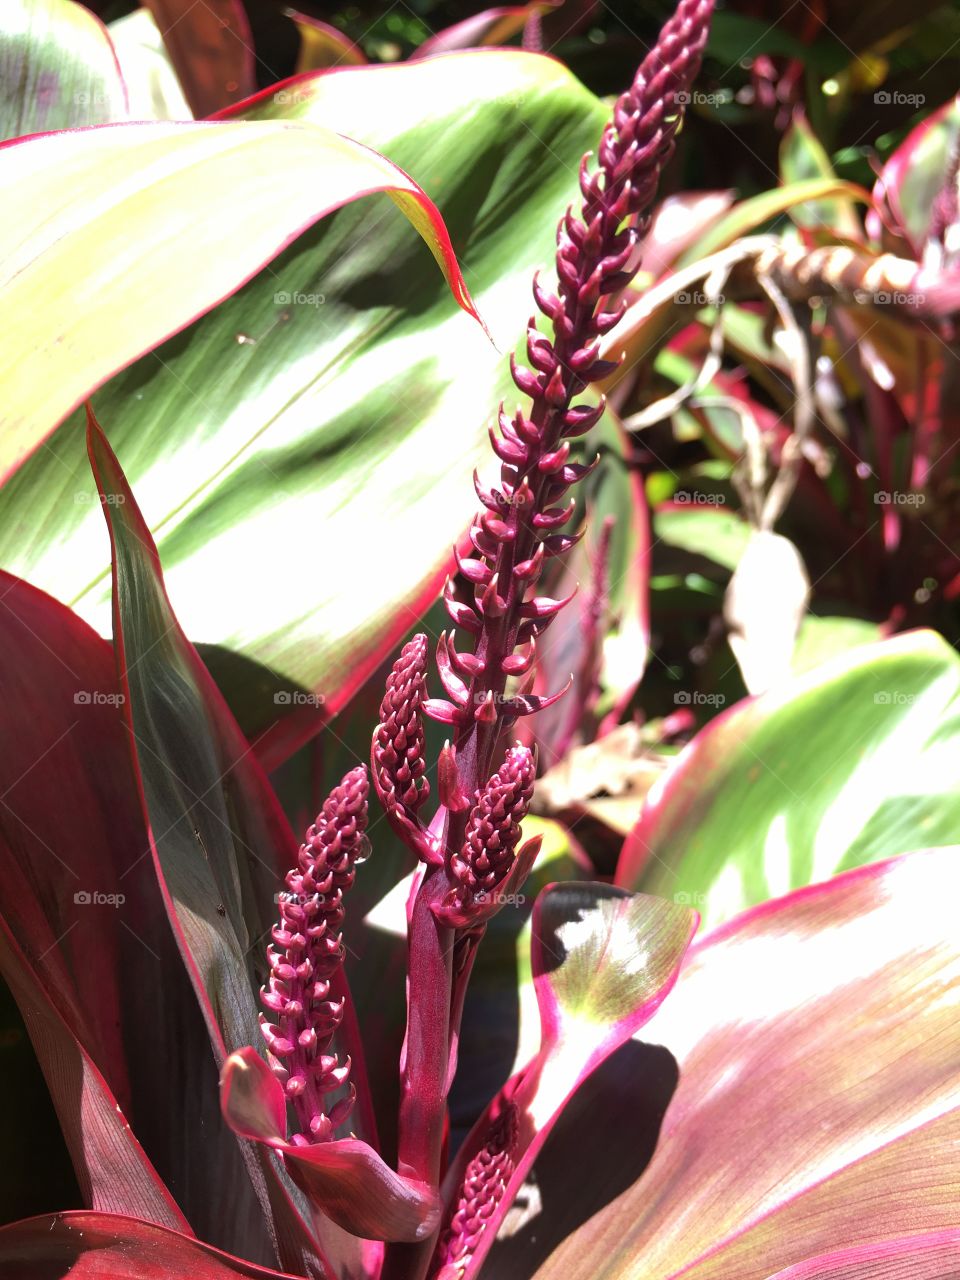 Deep red tropical flower with large leaves surrounding it found in Hawaii.